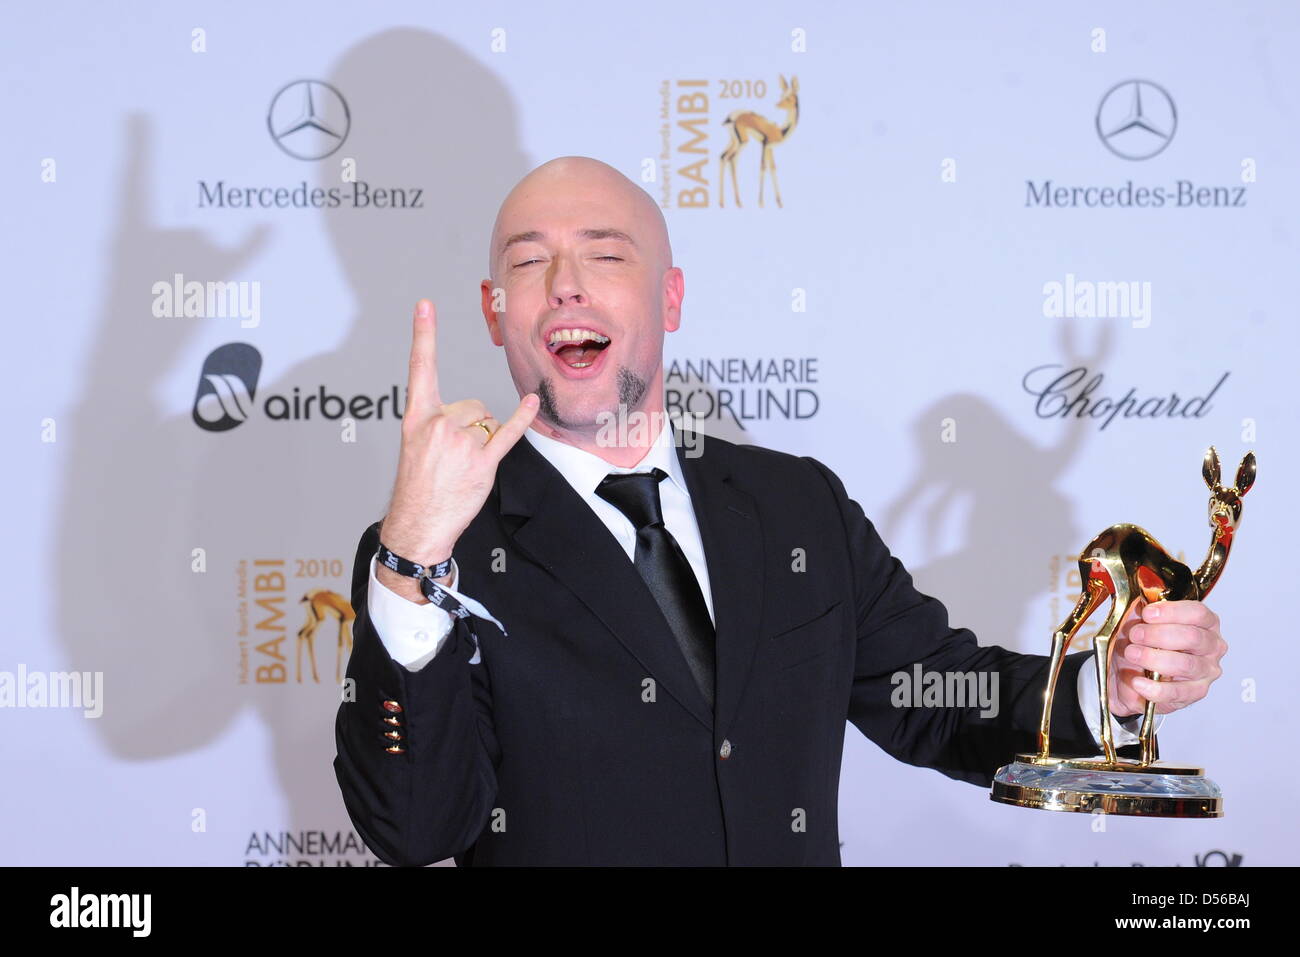 German singer Der Graf from Unheilig poses after receiving the Bambi Trophy during 62nd Bambi award in Potsdam, Germany, 11 November 2010. The Bambi is Germanys main media award. Photo: Jens Kalaene dpa/lbn  +++(c) dpa - Bildfunk+++ Stock Photo